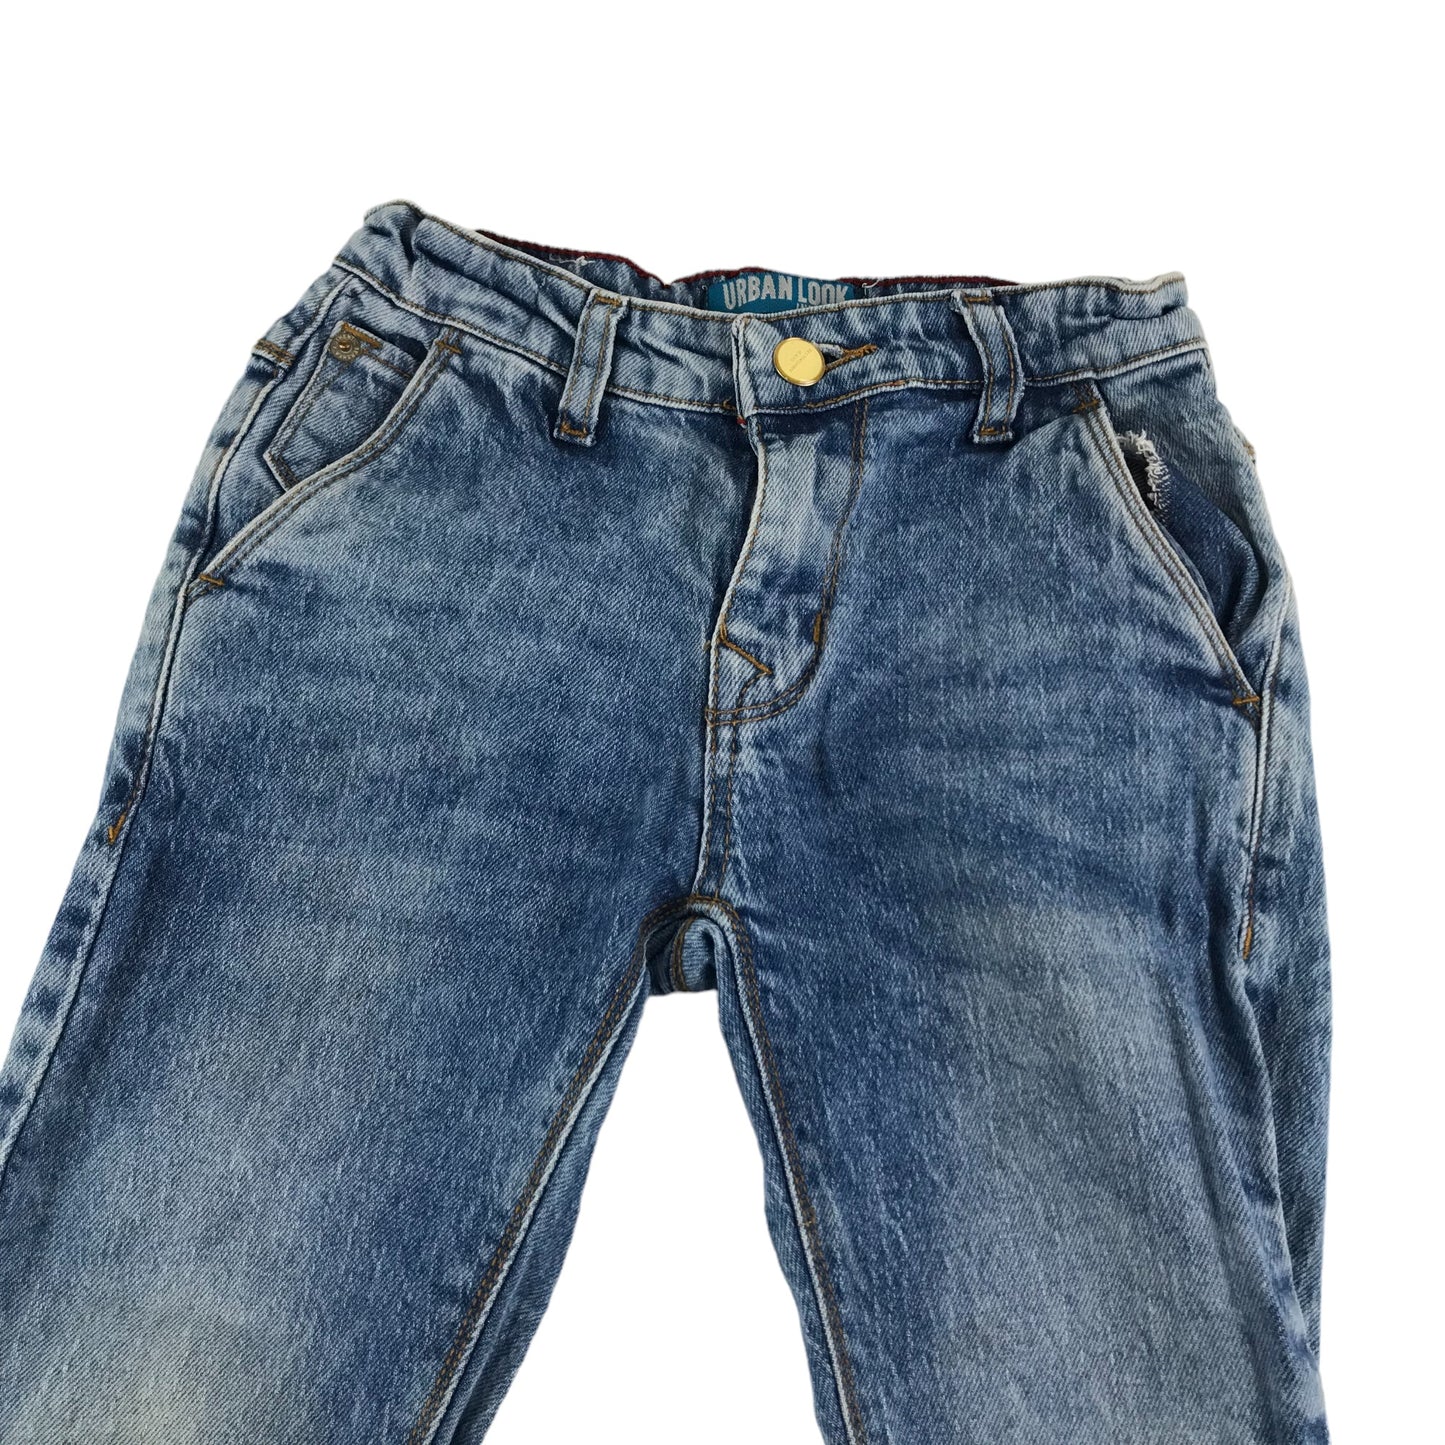 Urban Look Jeans Age 6 Blue Stone Wash Effect